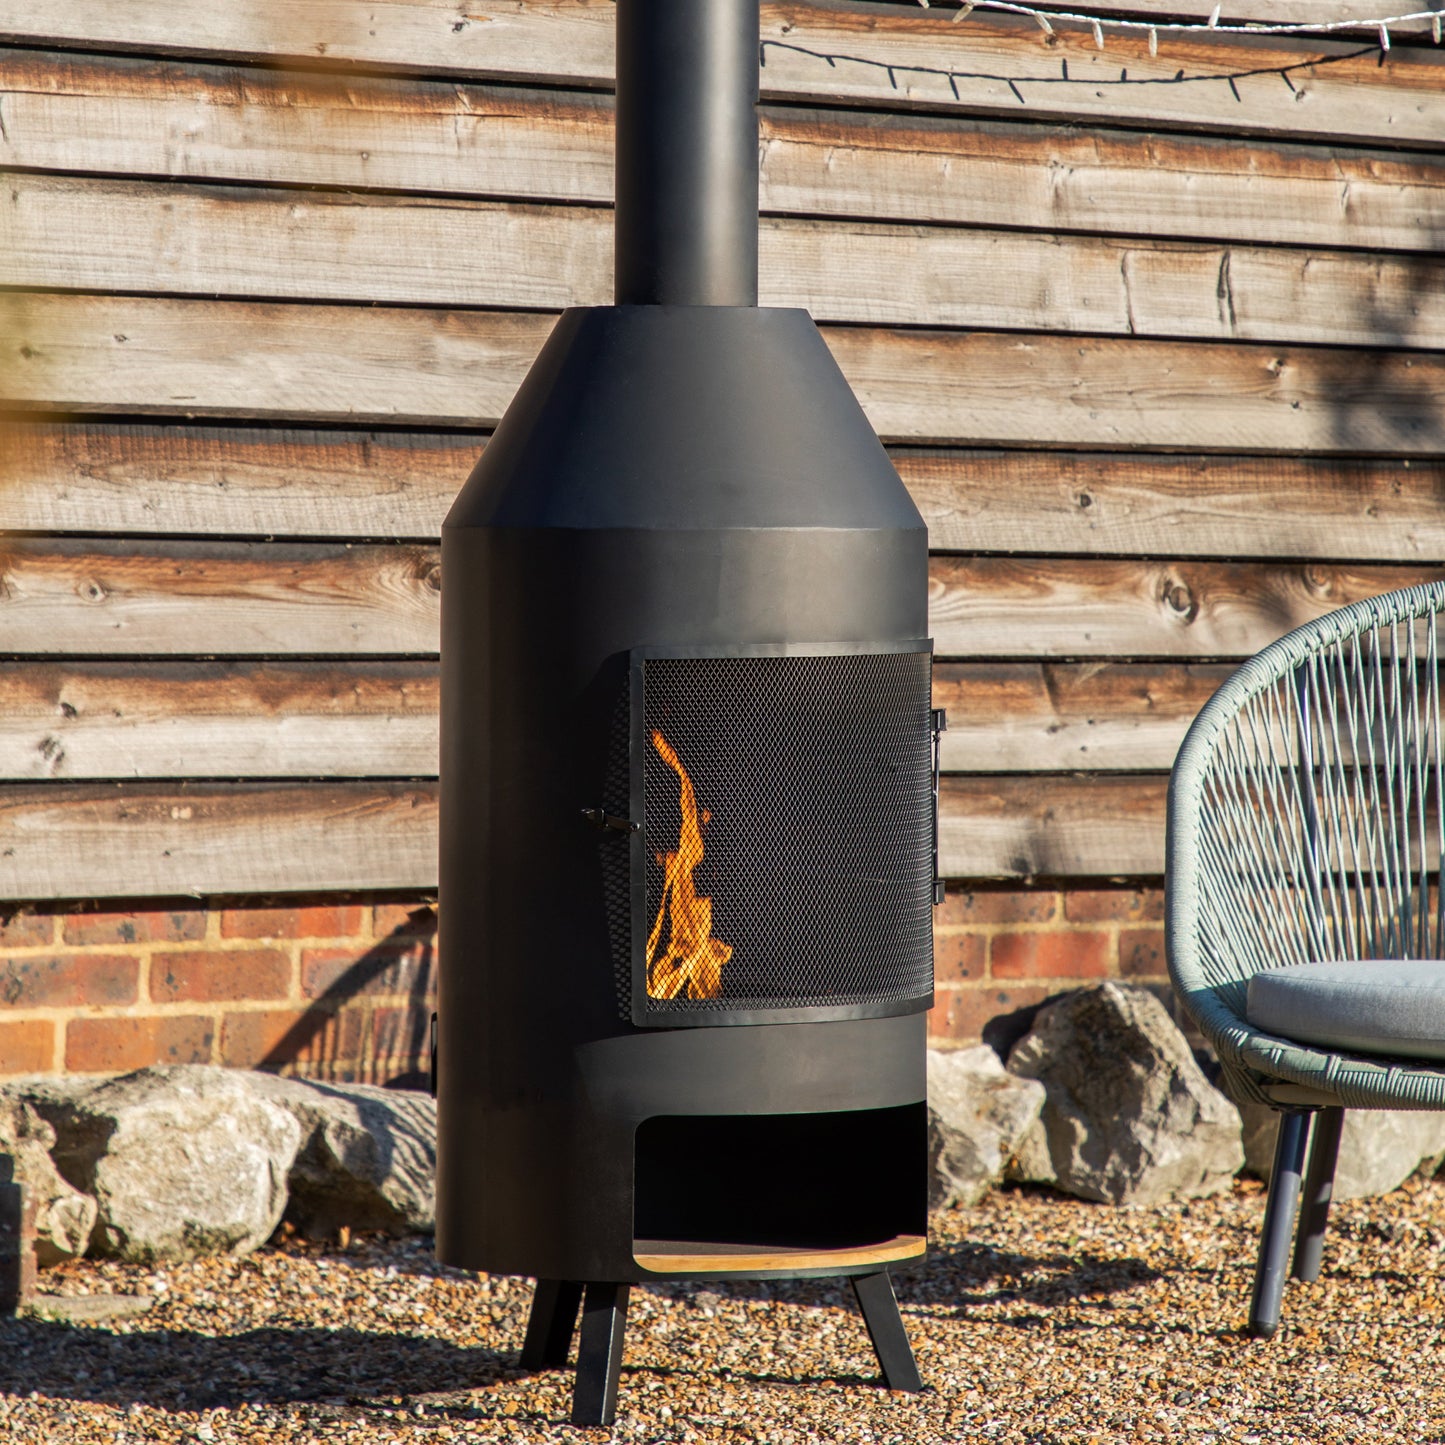 A Marldon Chiminea with Pizza Shelf 500x500x1835mm serving as home furniture and complementing interior decor, showcased in front of a brick wall.